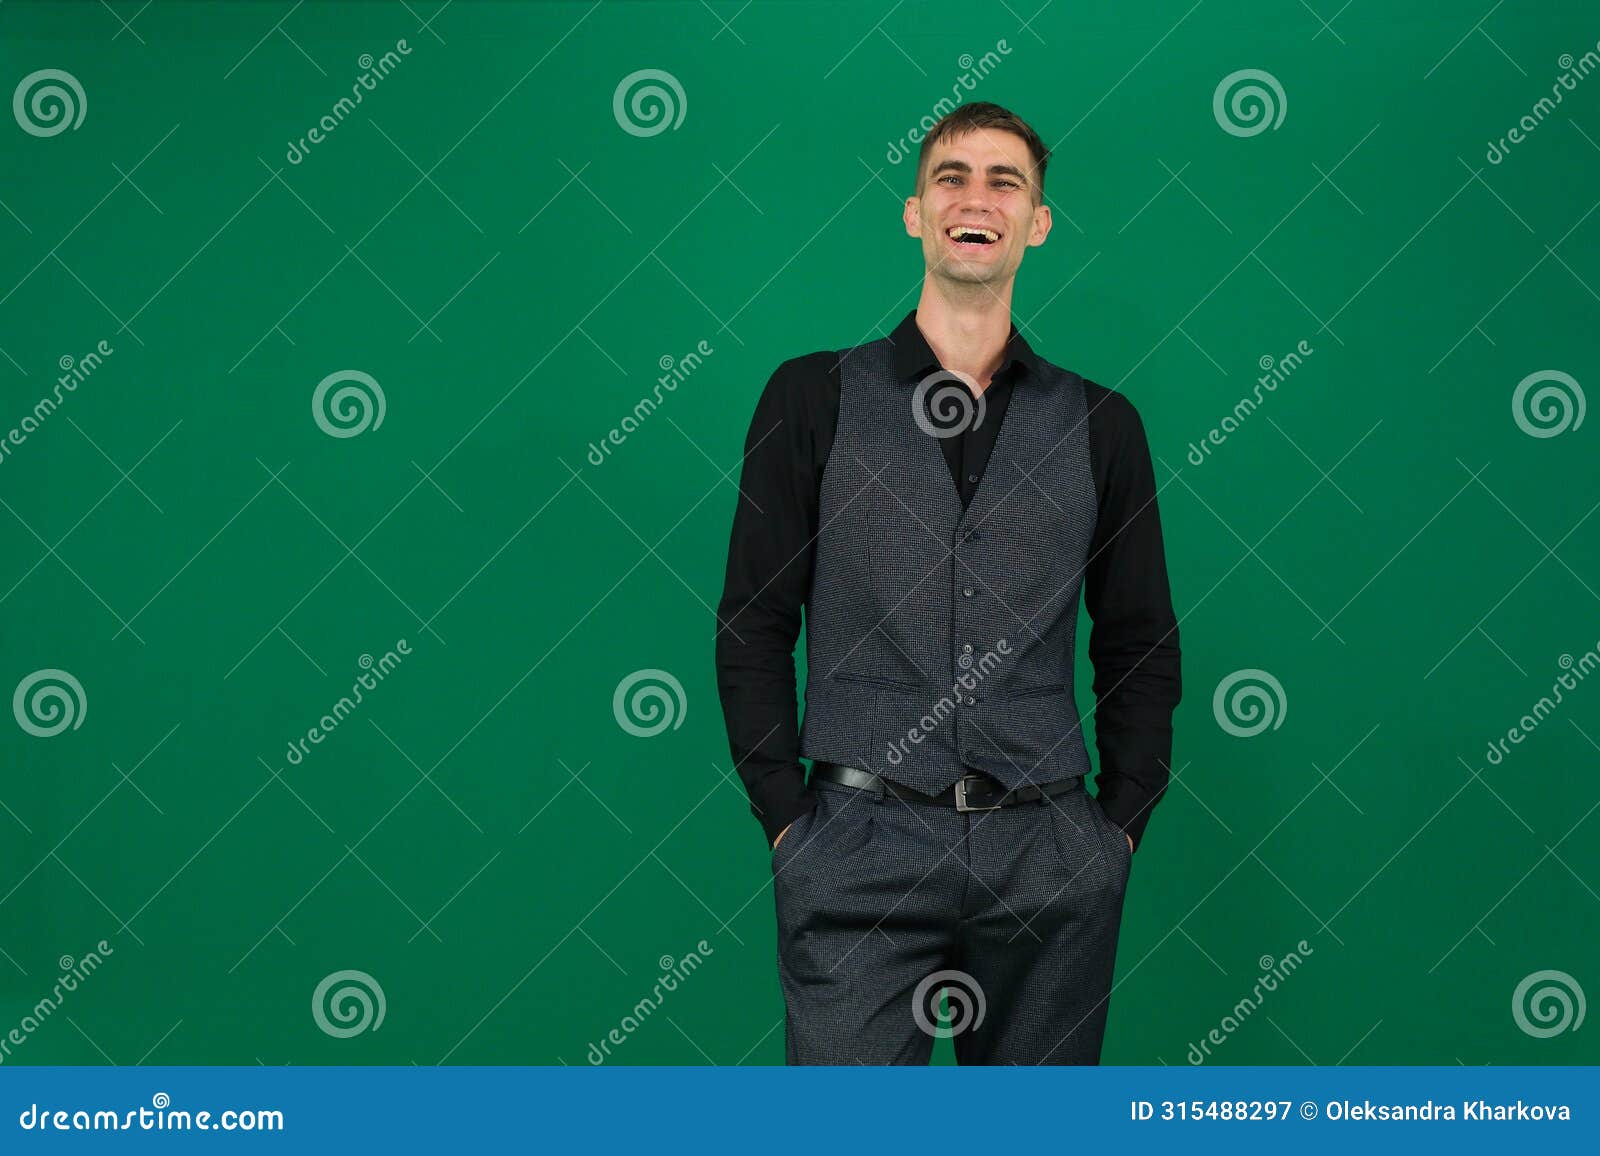 young business man full body  on a white and green background